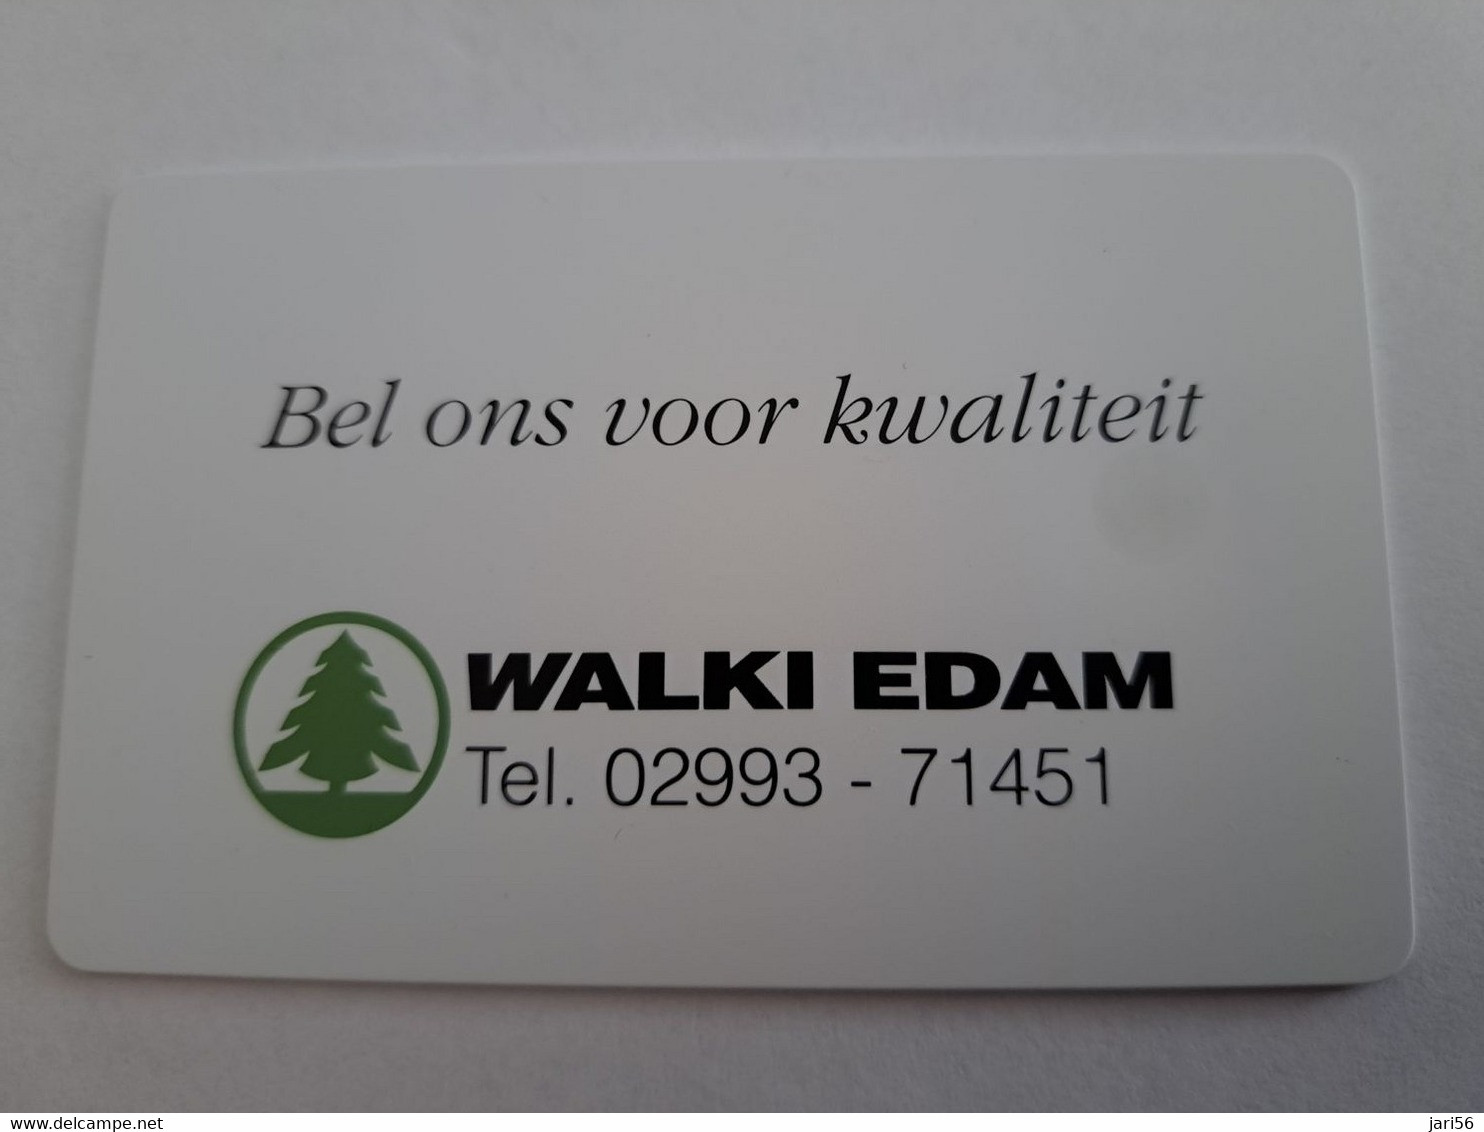 NETHERLANDS  ADVERTISING CHIPCARD  CRE 081  WALKI EDAM      MINT    ** 12042** - Private